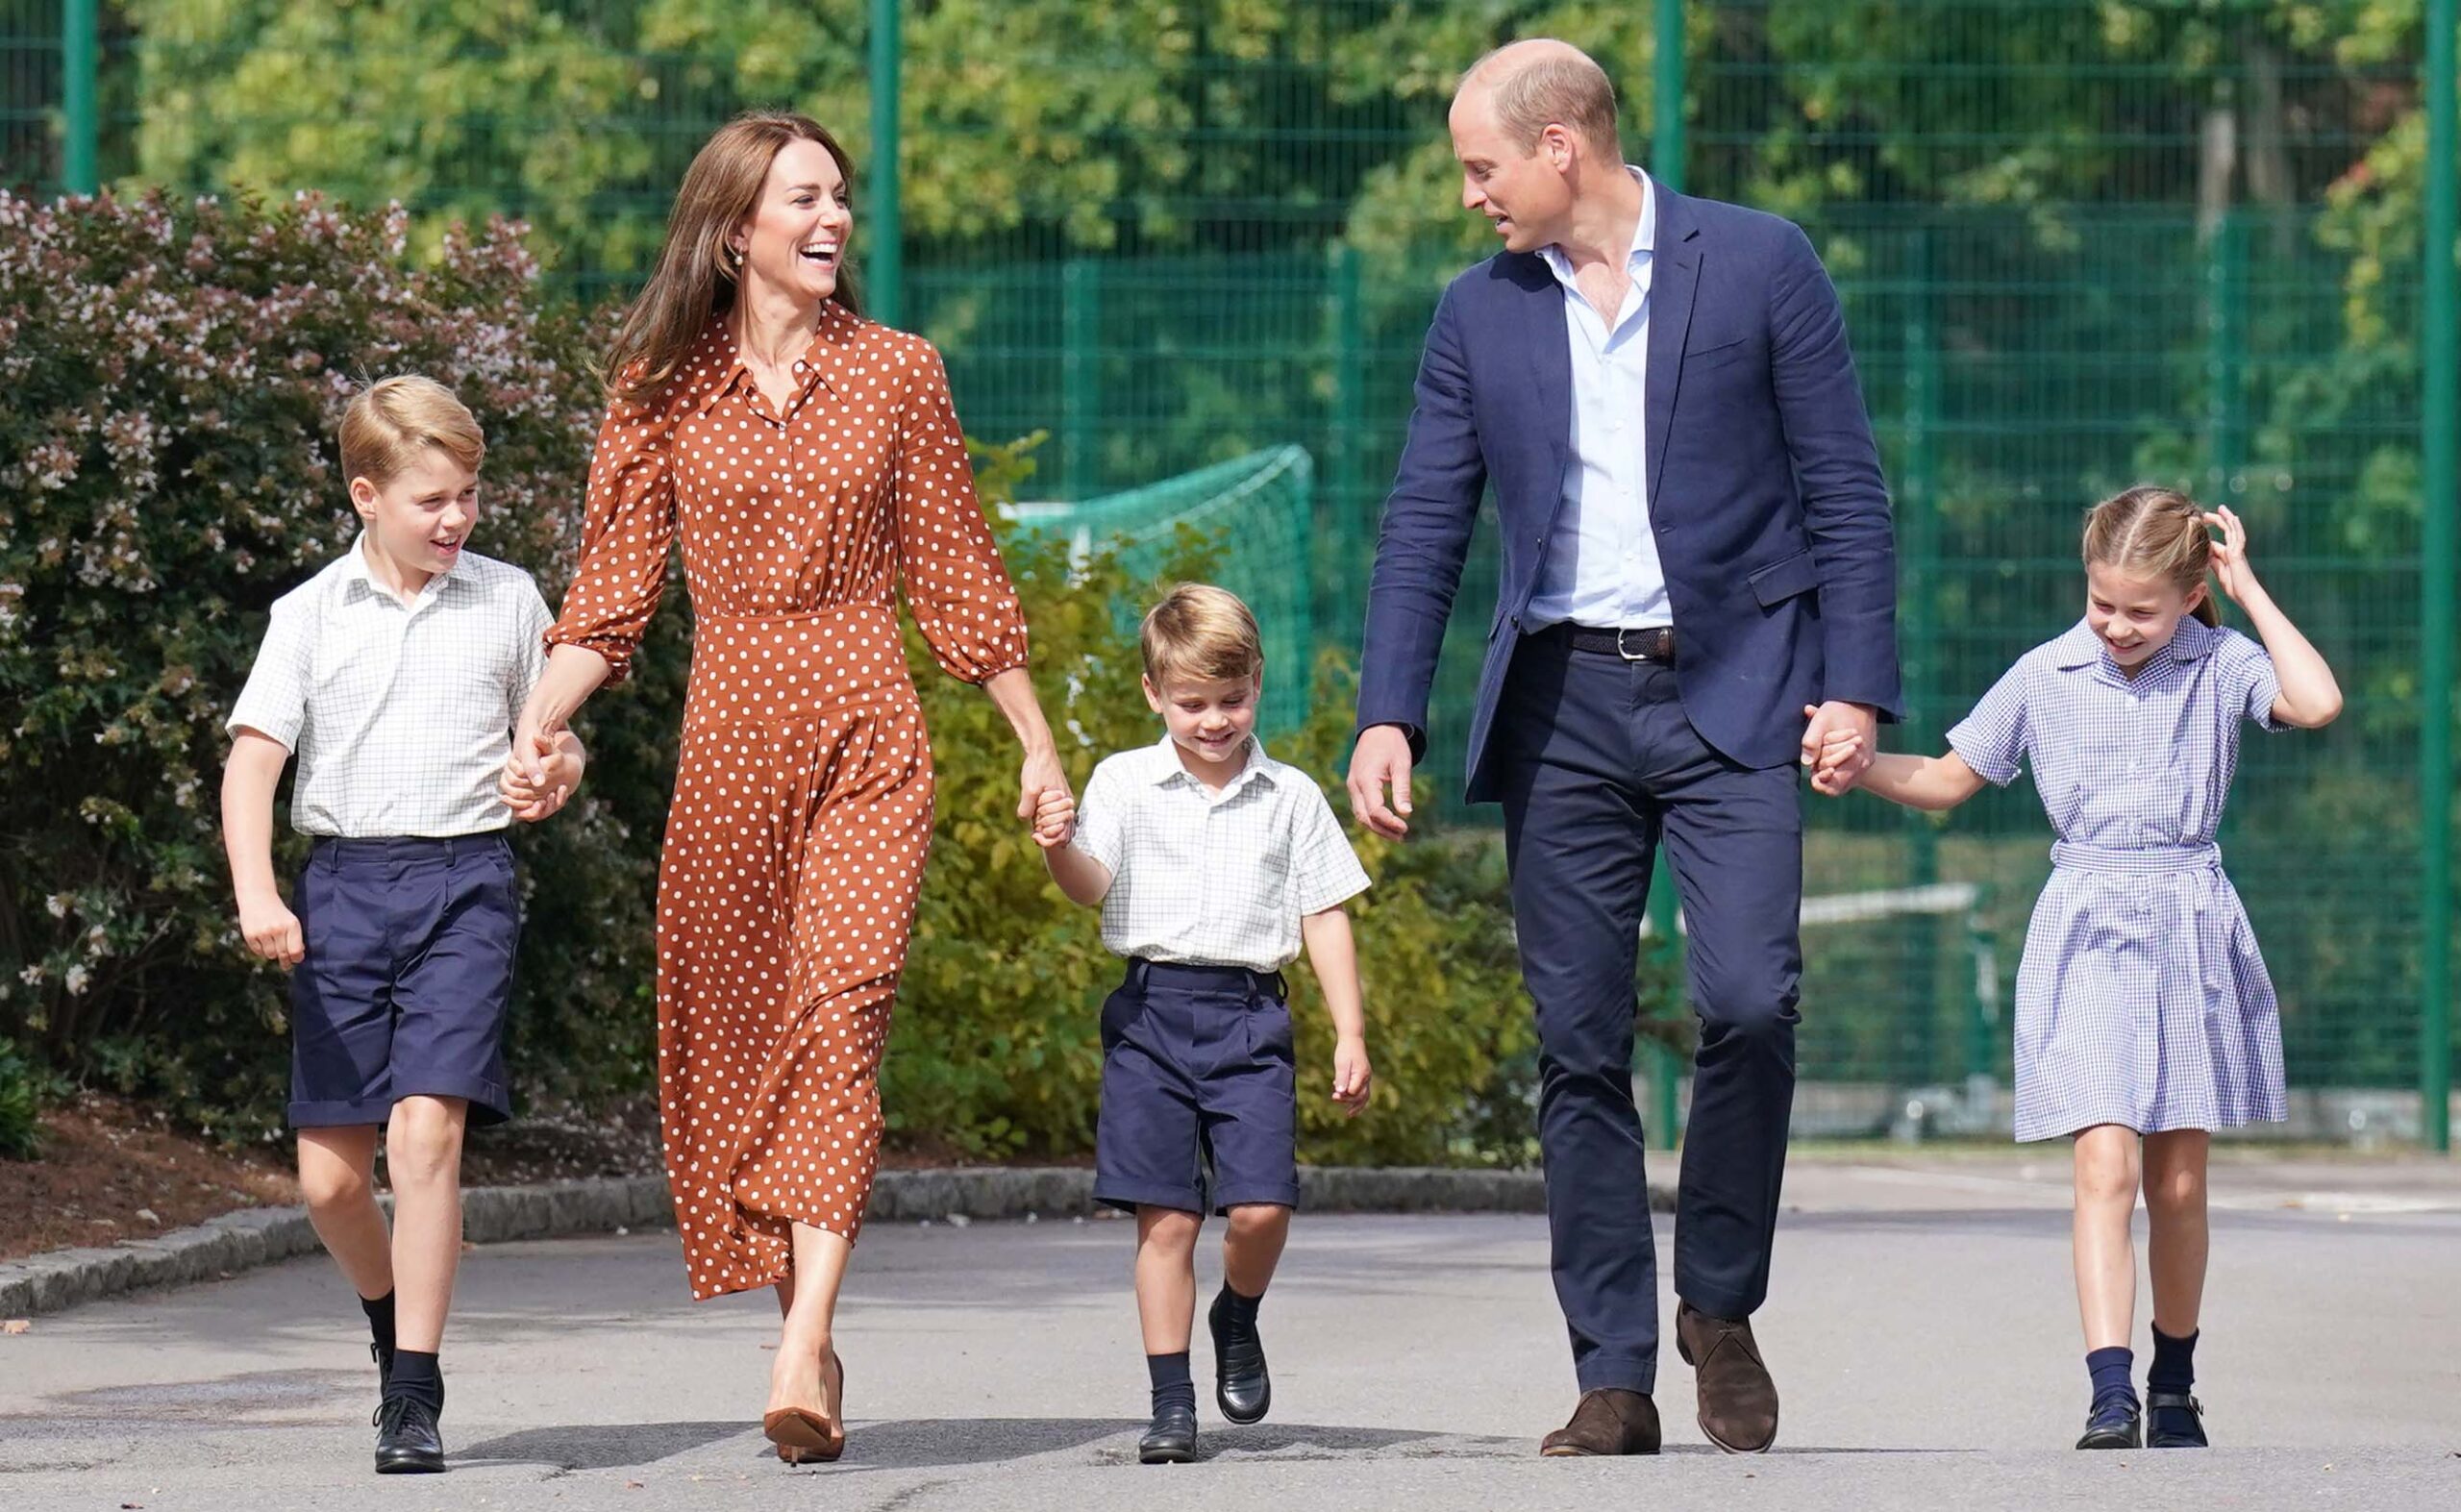 NEW PHOTOS: Prince George, Princess Charlotte and Prince Louis steal the show at new Windsor school